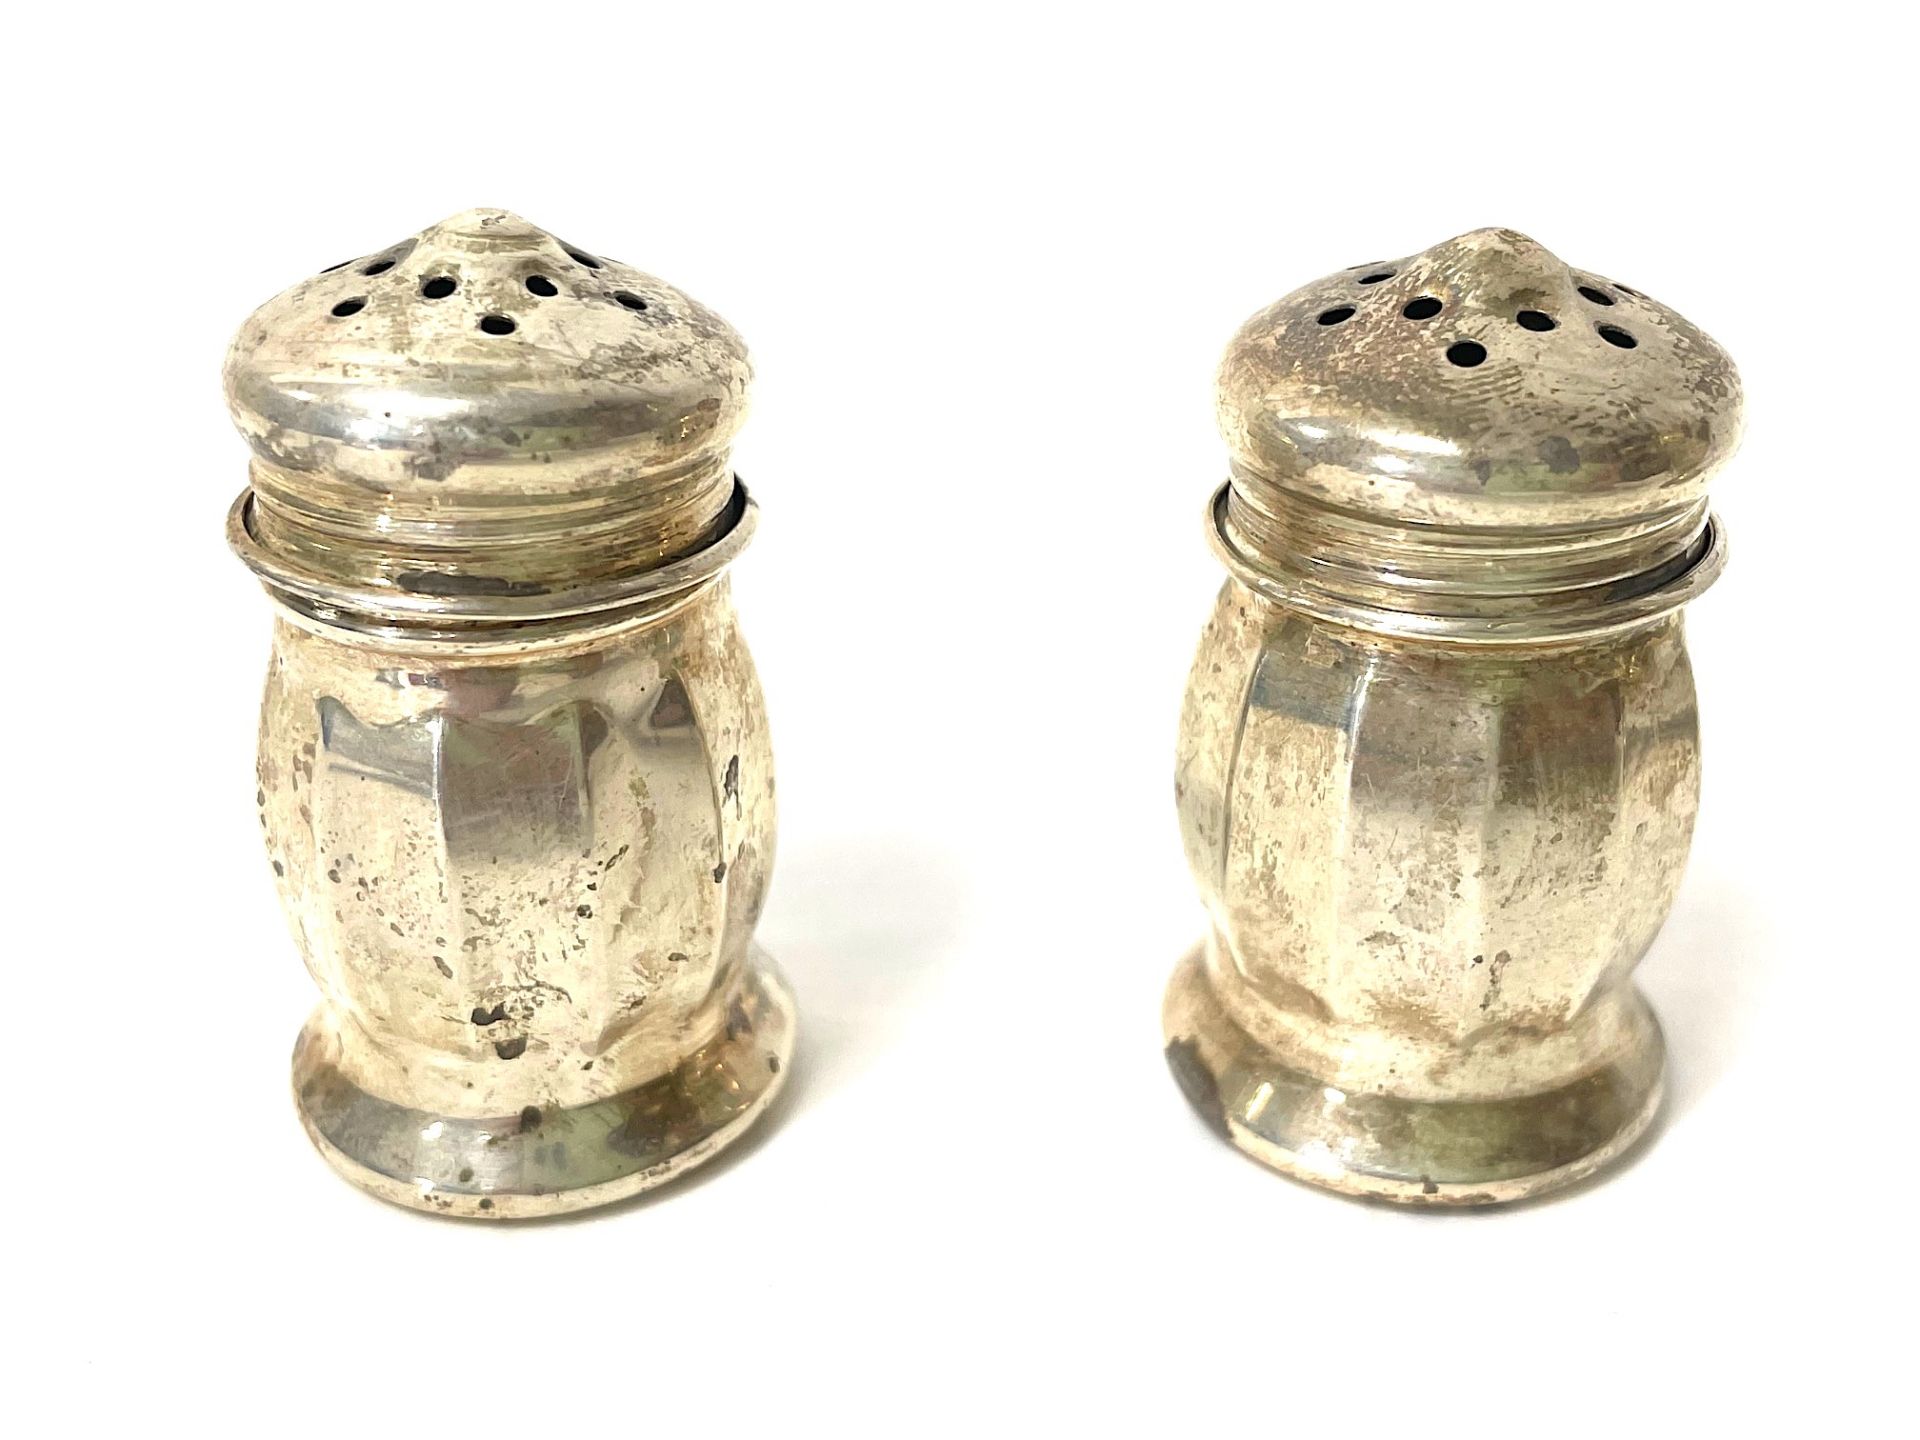 40 pairs of salt/pepper and spice shakers, - Image 12 of 88